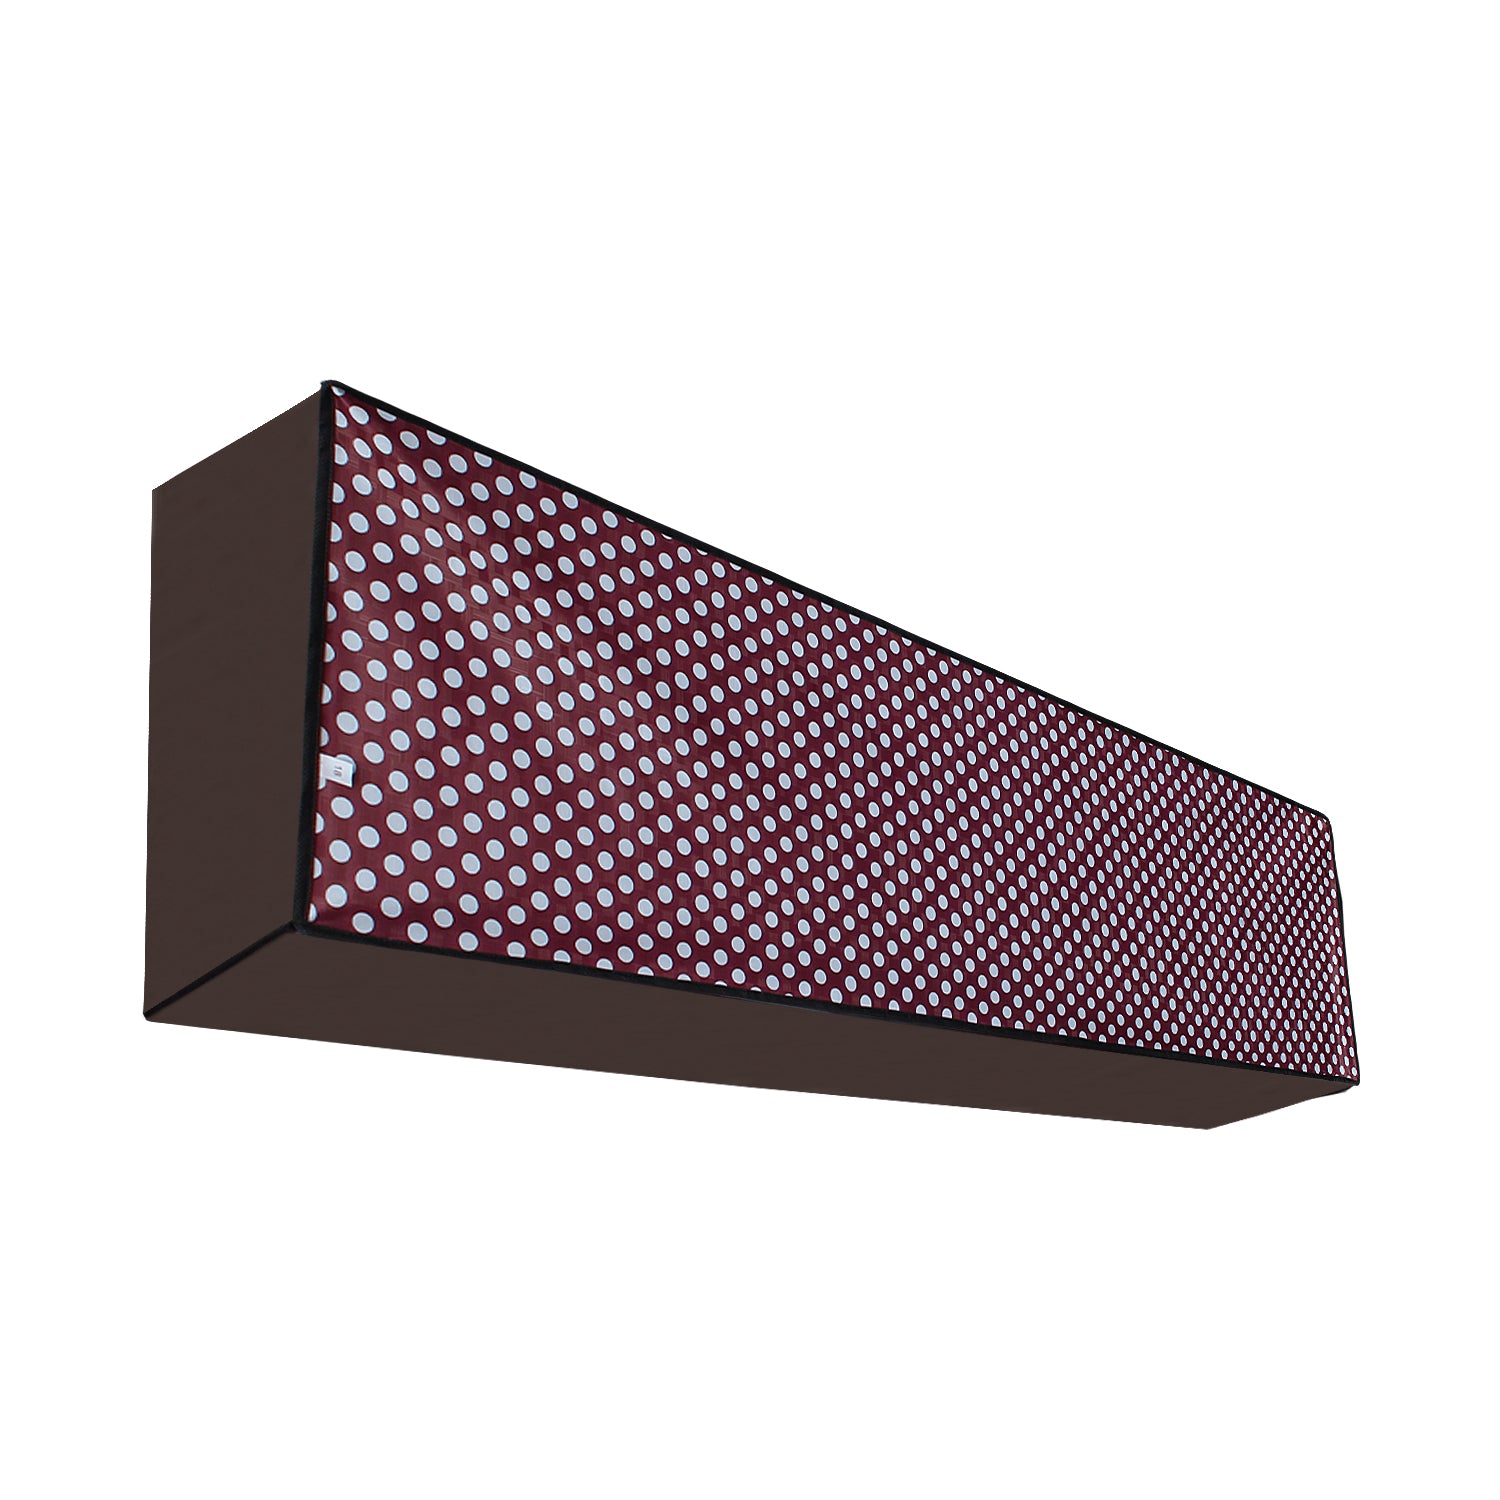 Waterproof and Dustproof Split Indoor AC Cover, SA46 - Dream Care Furnishings Private Limited